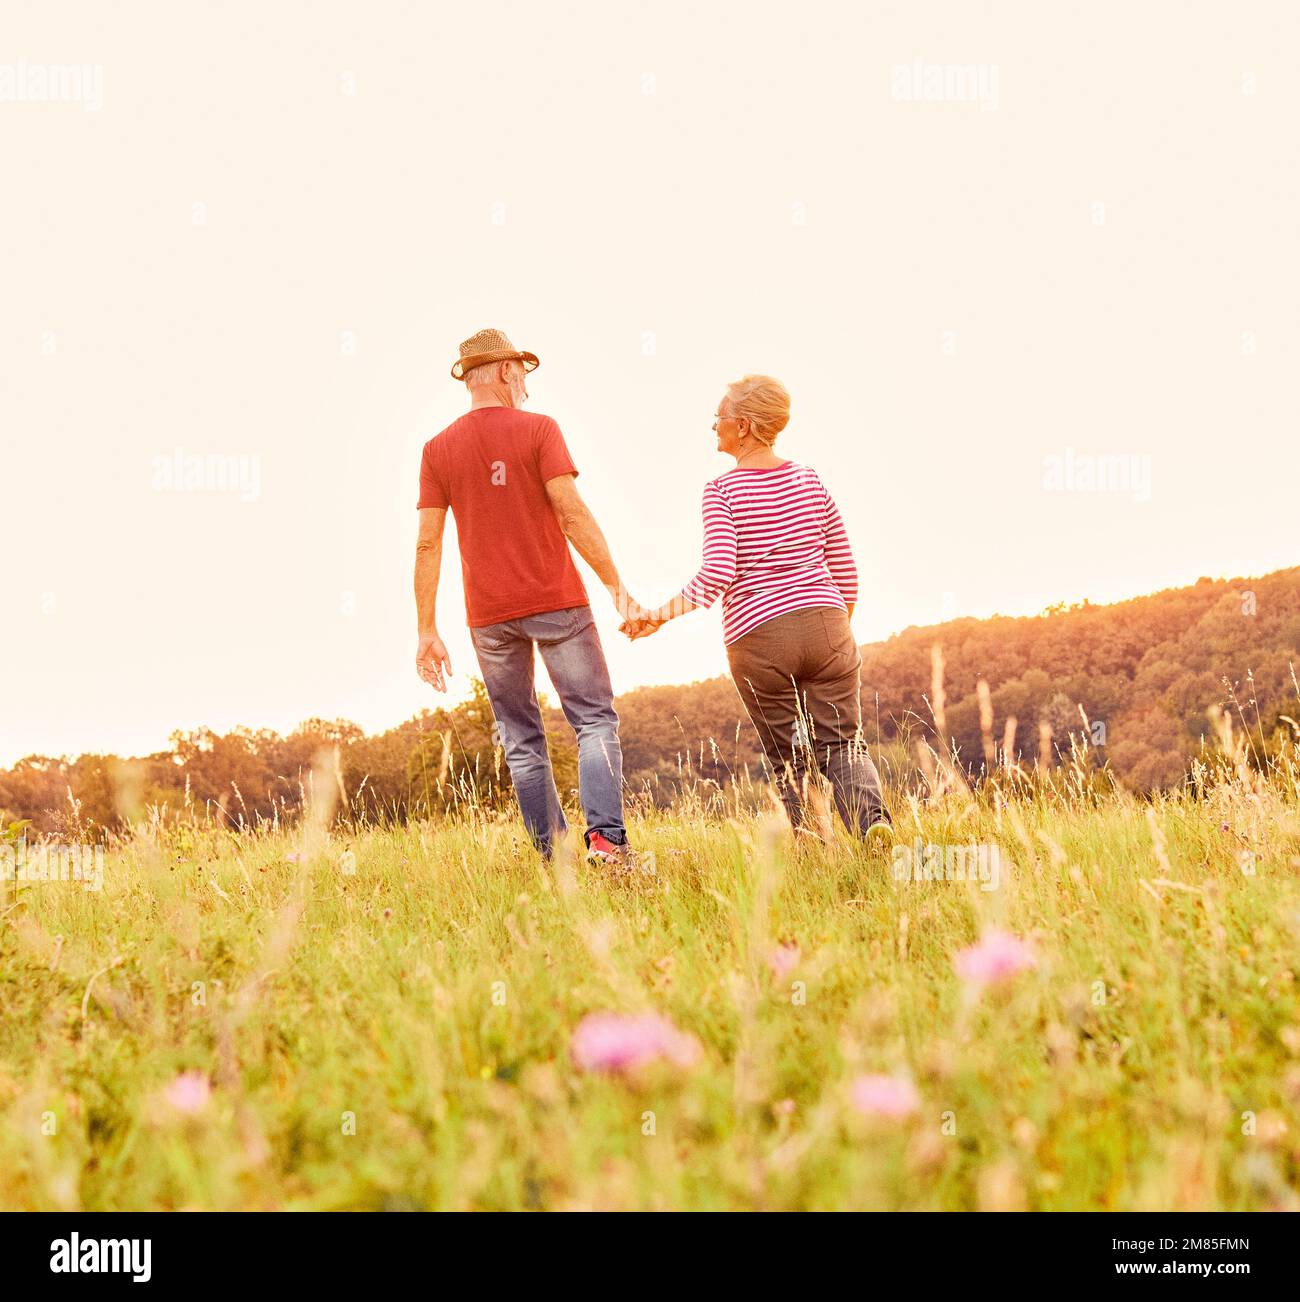 woman man outdoor senior couple happy lifestyle retirement together smiling love old nature mature back view walking future hope happy holding hands Stock Photo